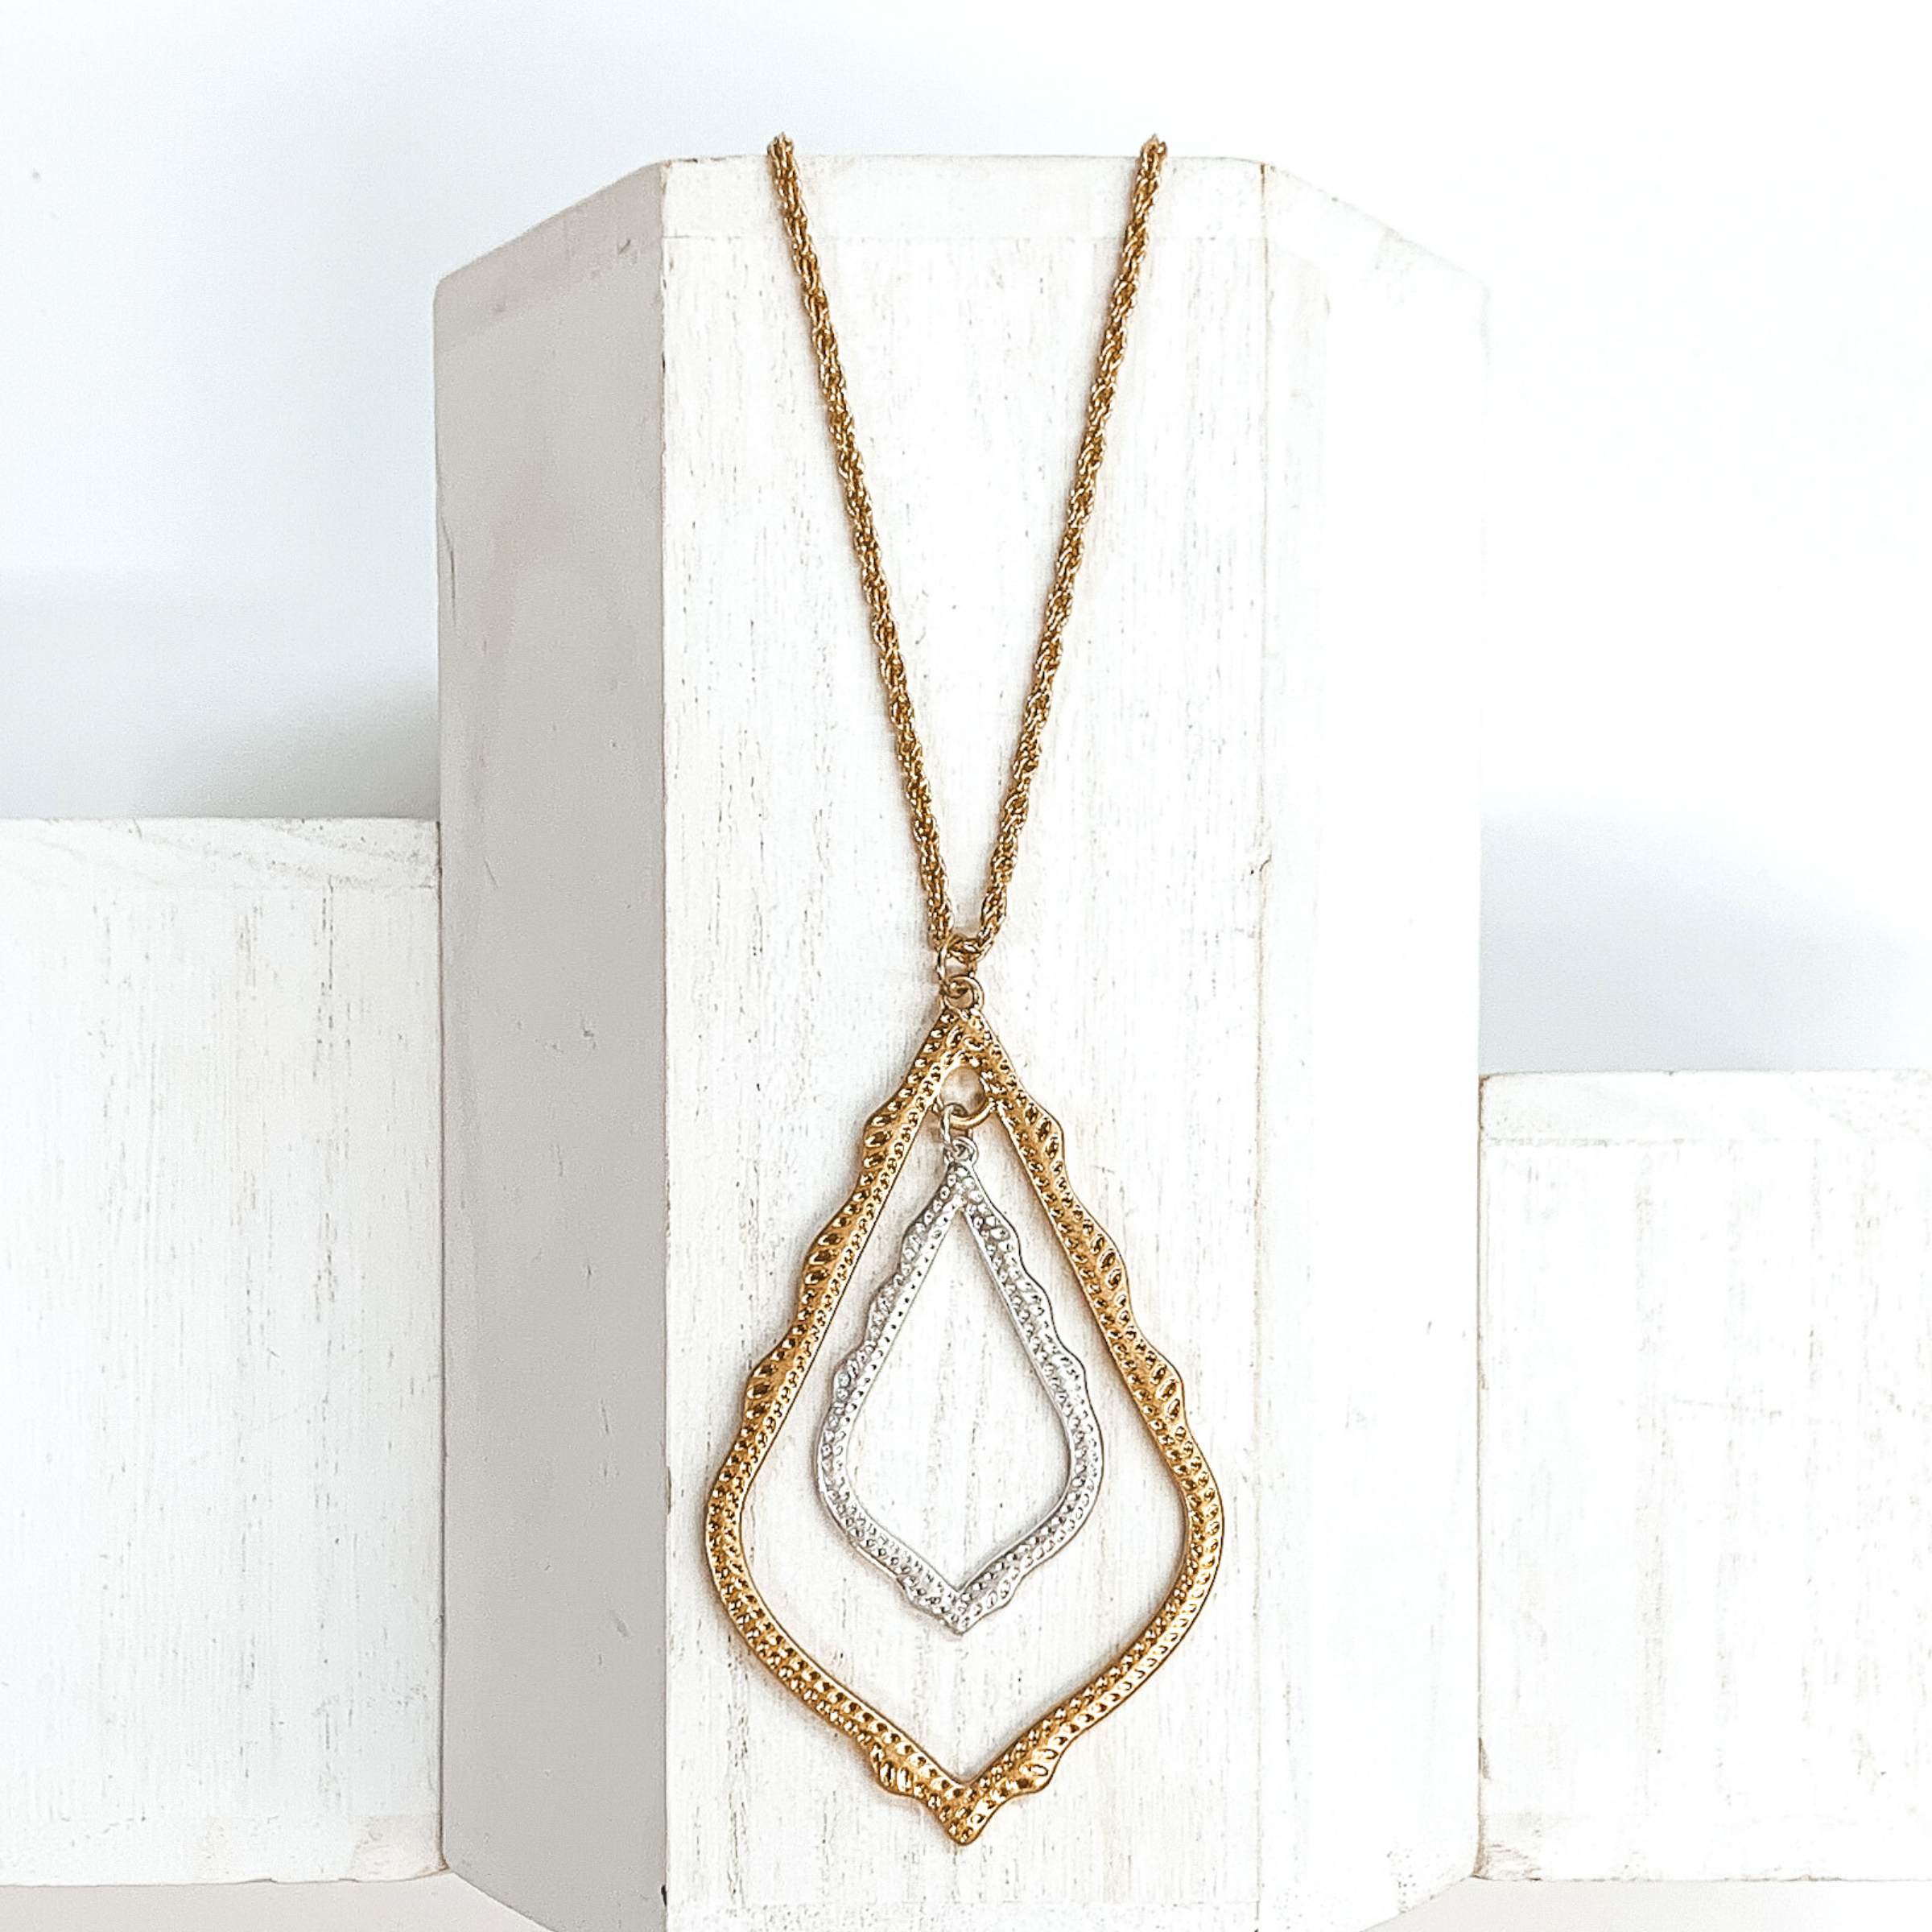 Small, gold rope chained necklace with two open teardrop pendants. This bigger pendant is gold and the smaller pendant is silver. This necklace is pictured on a white block on a white background.